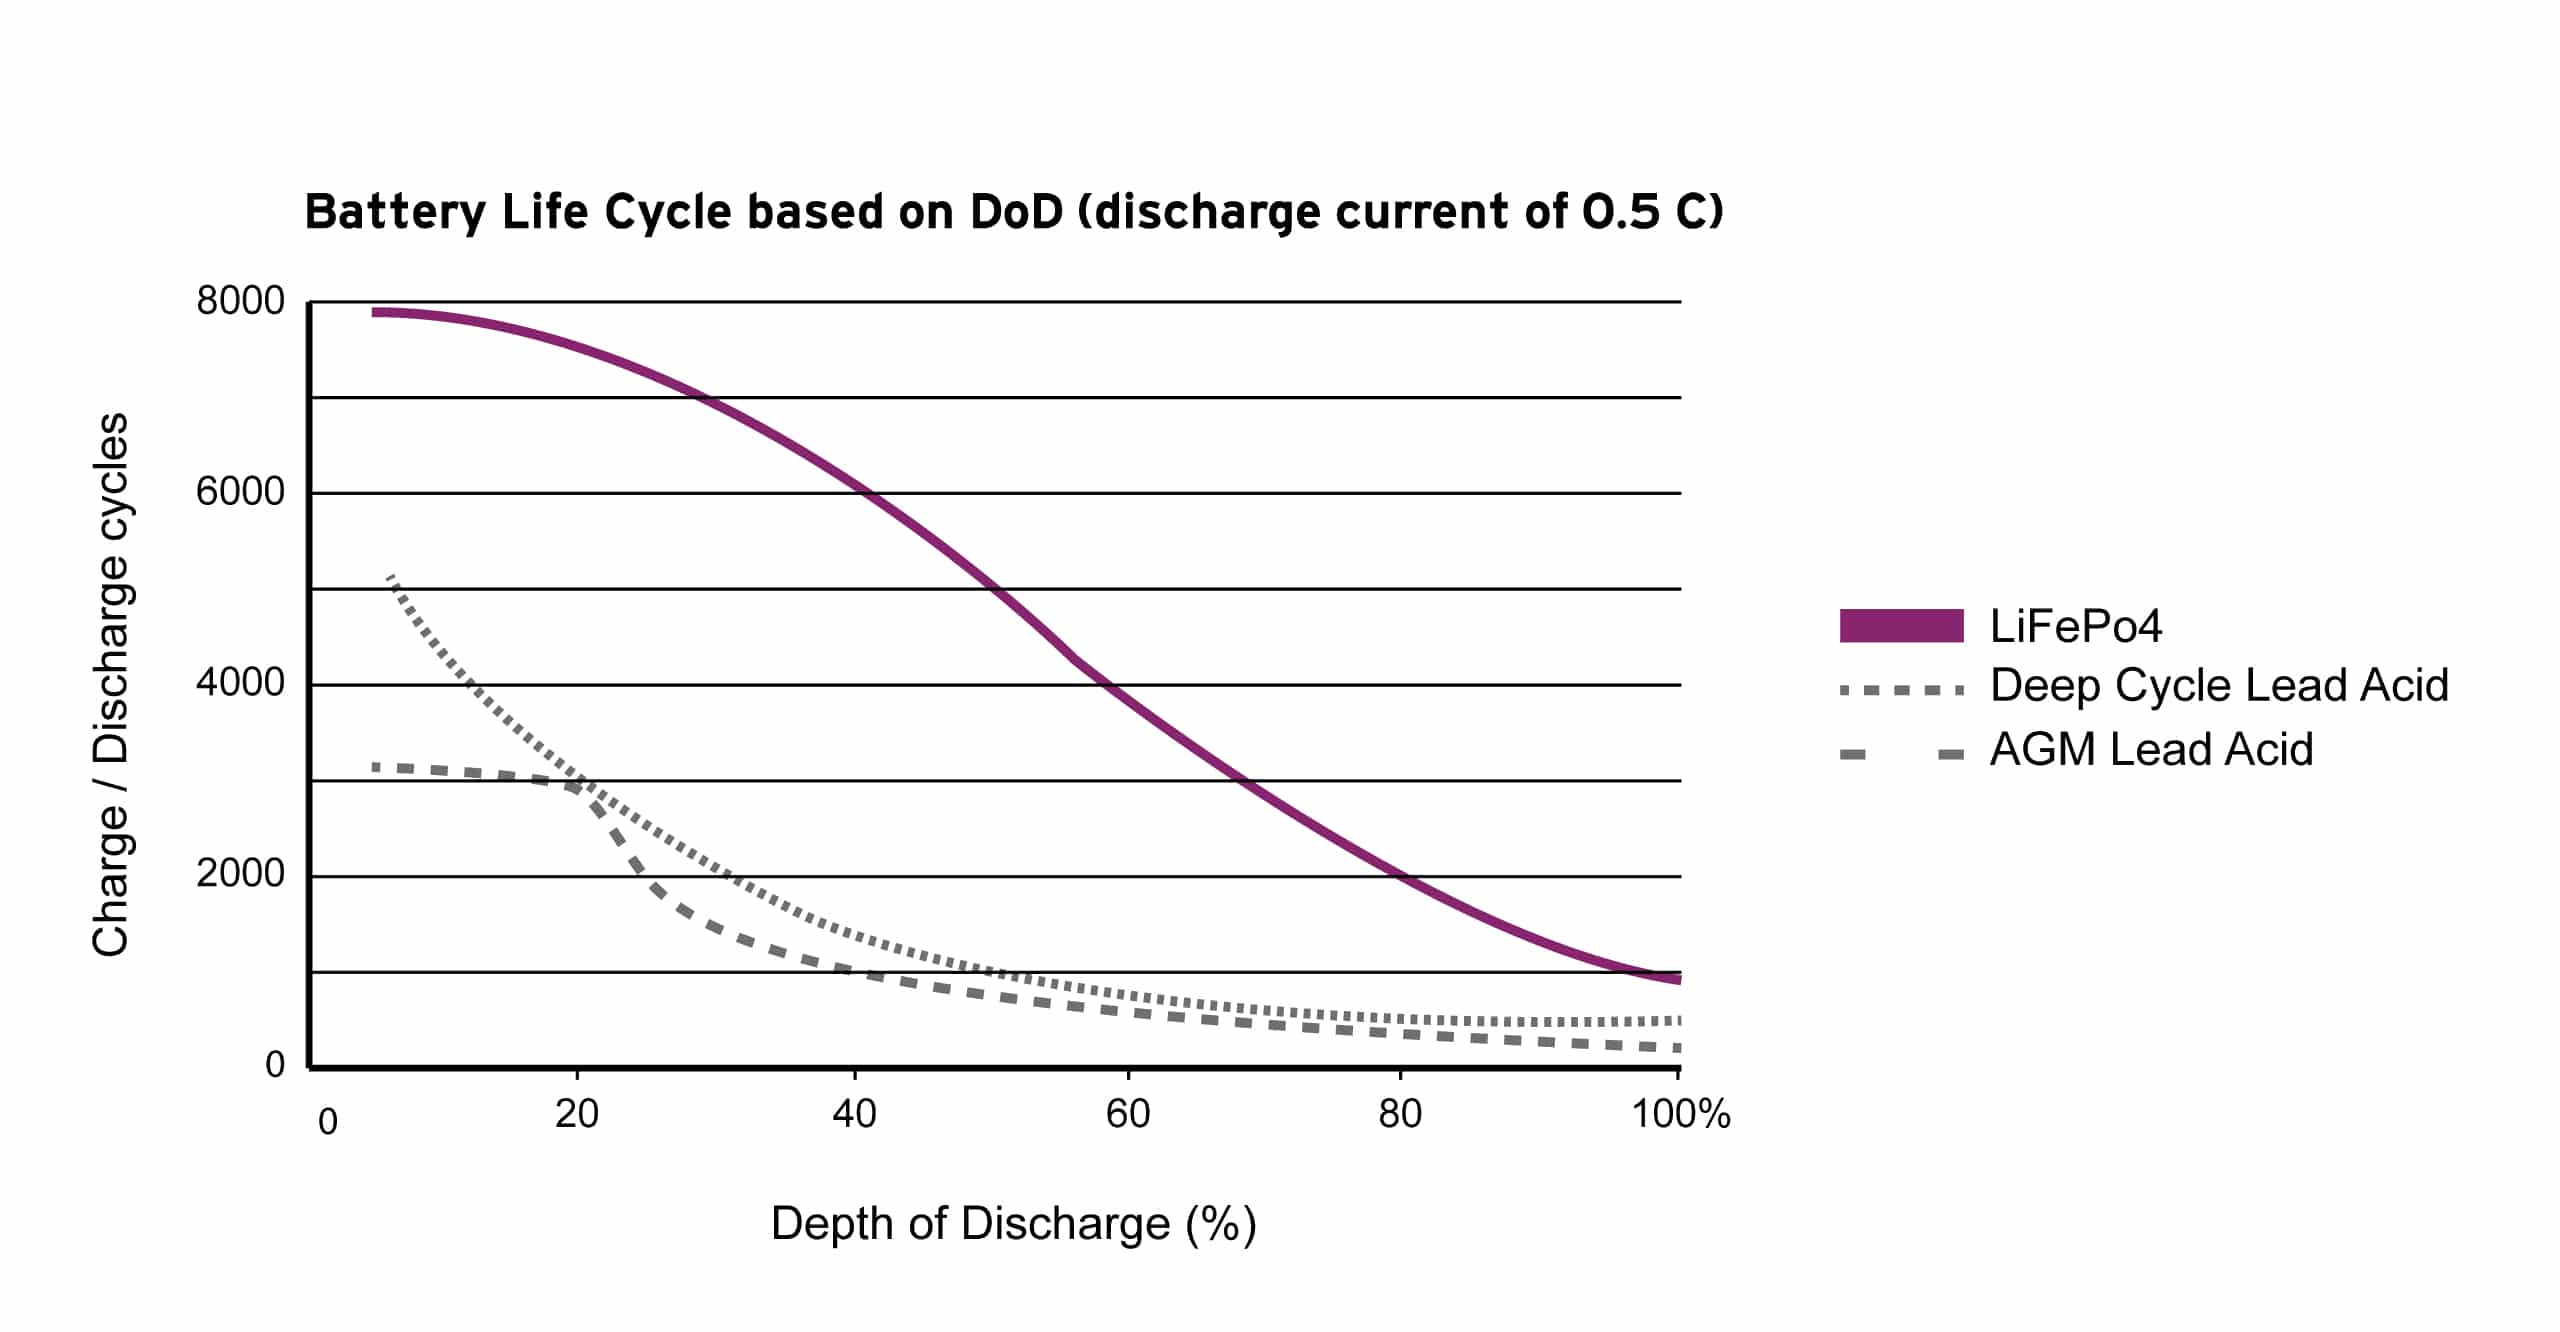 battery-life-cycle-based-on-dod.jpg